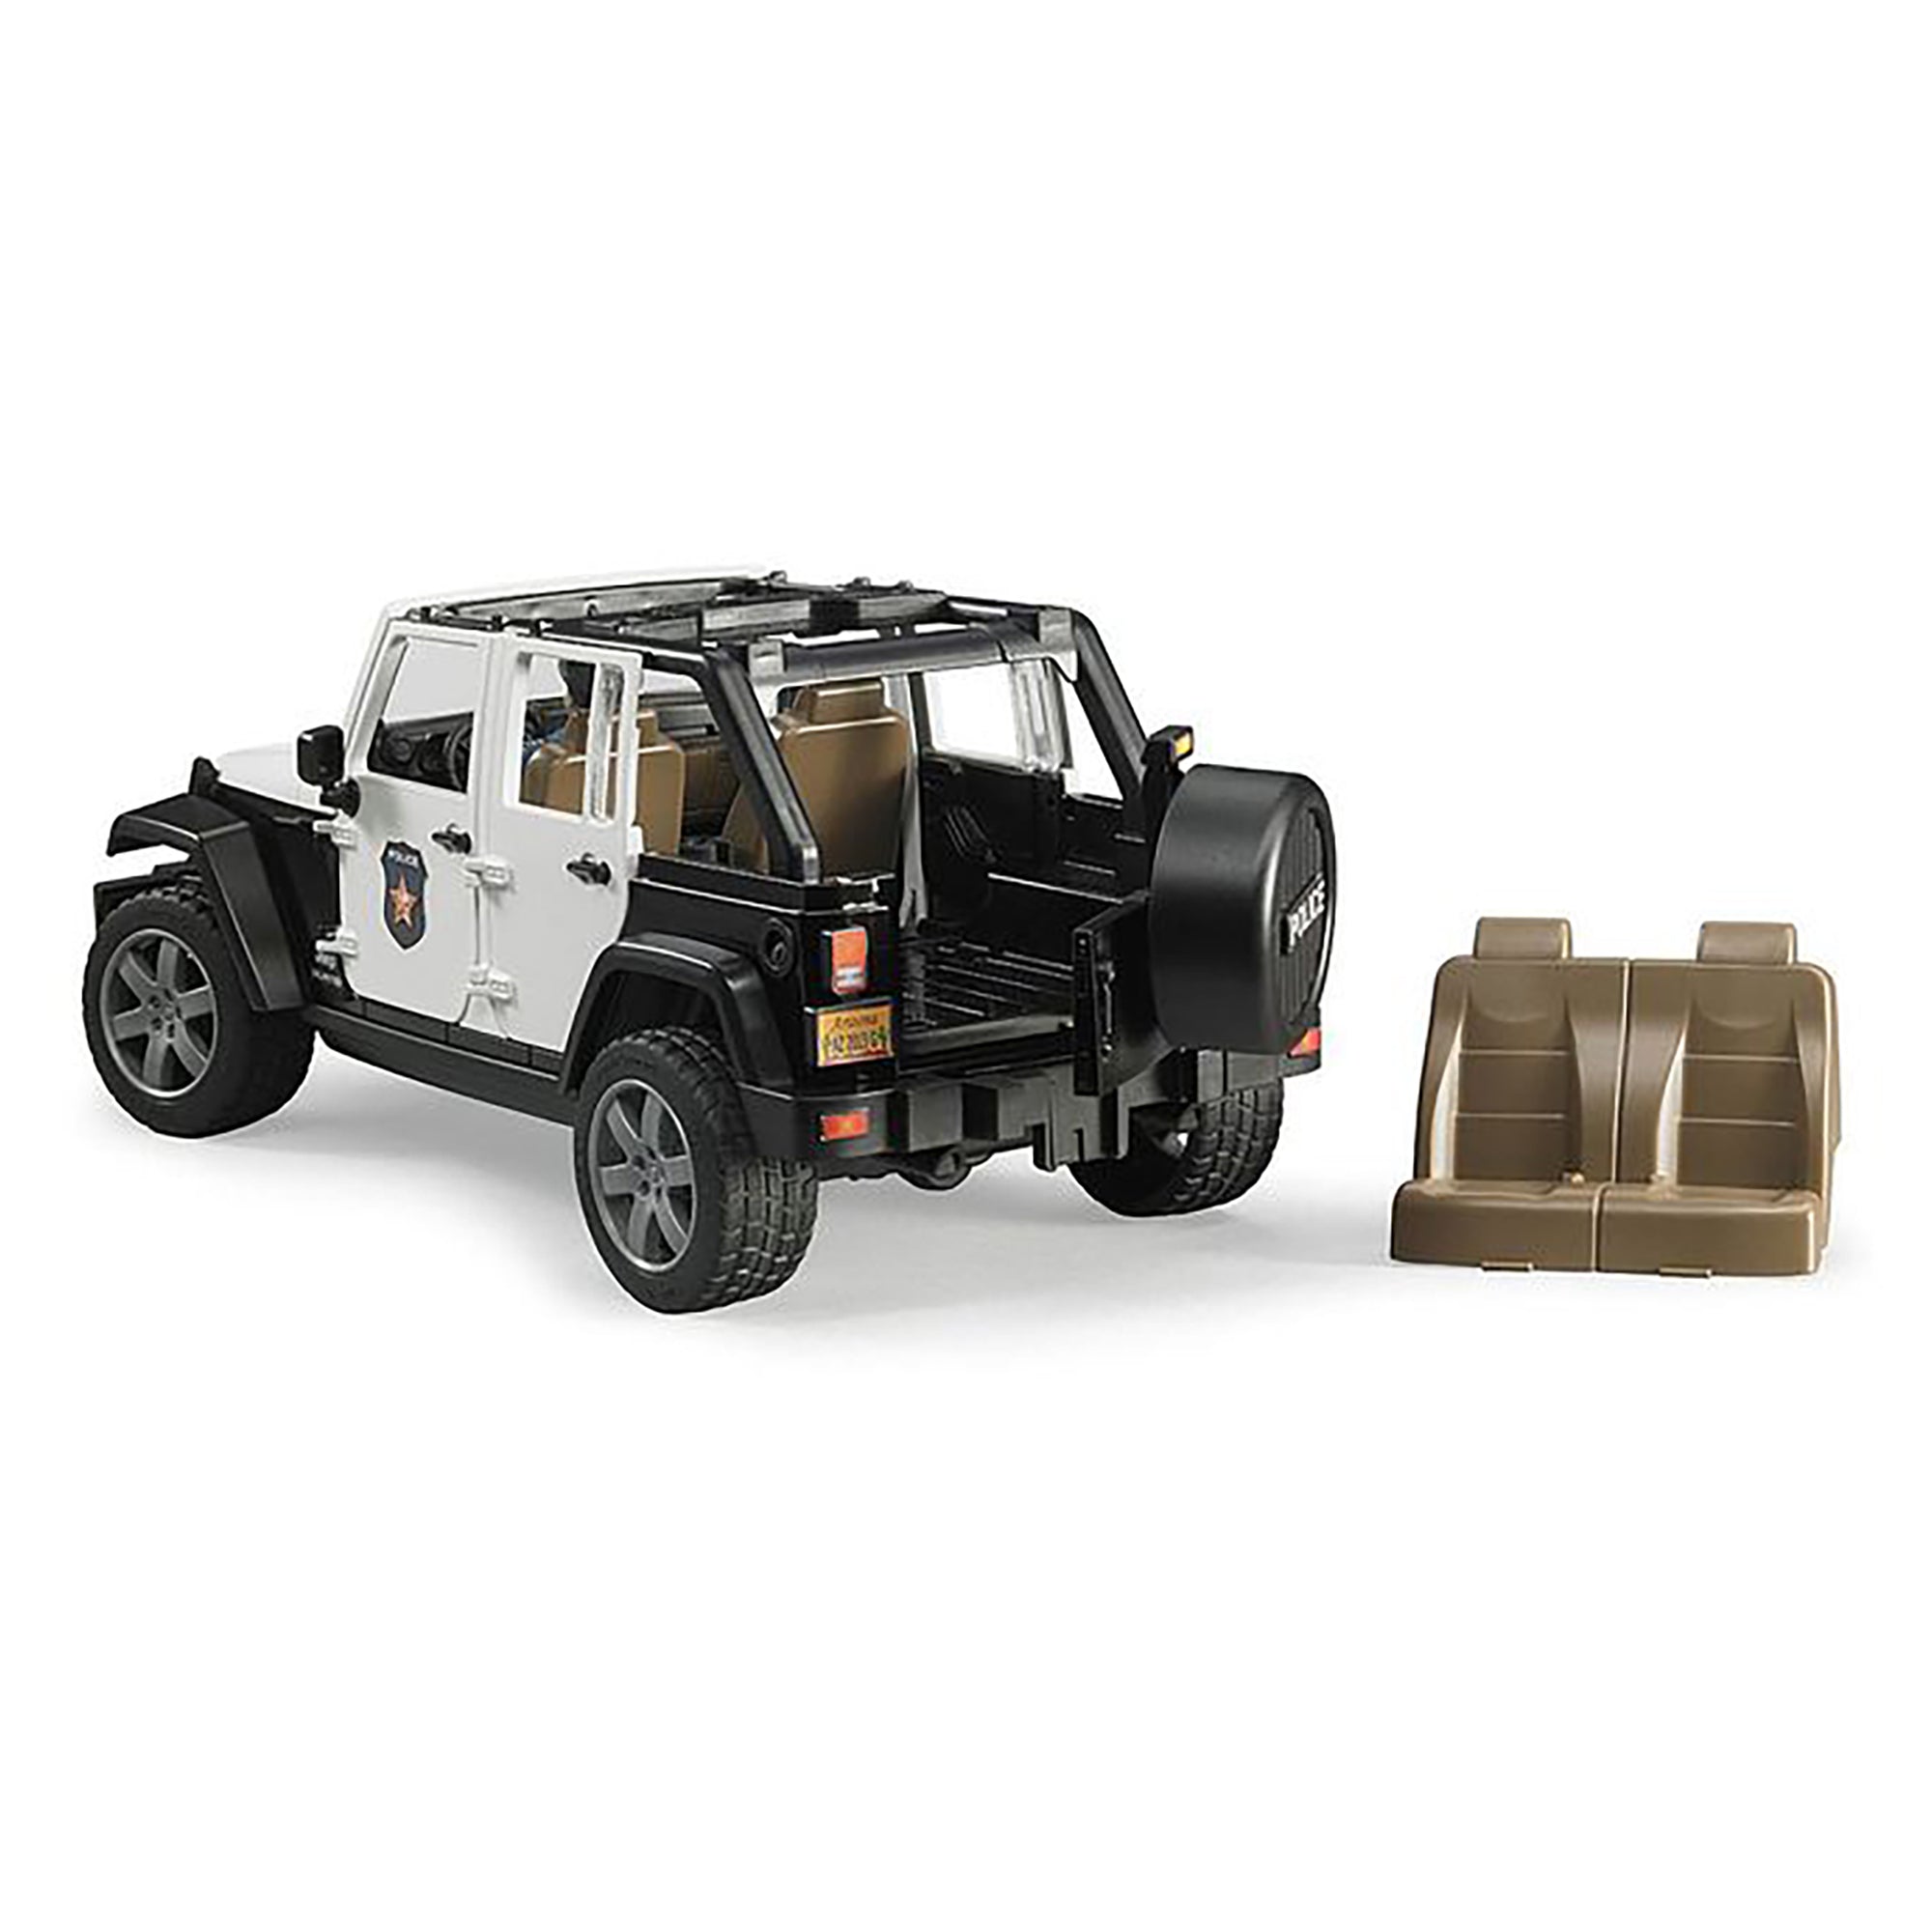 Bruder 1/16 Jeep Wrangler Rubicon Police Vehicle with Policeman